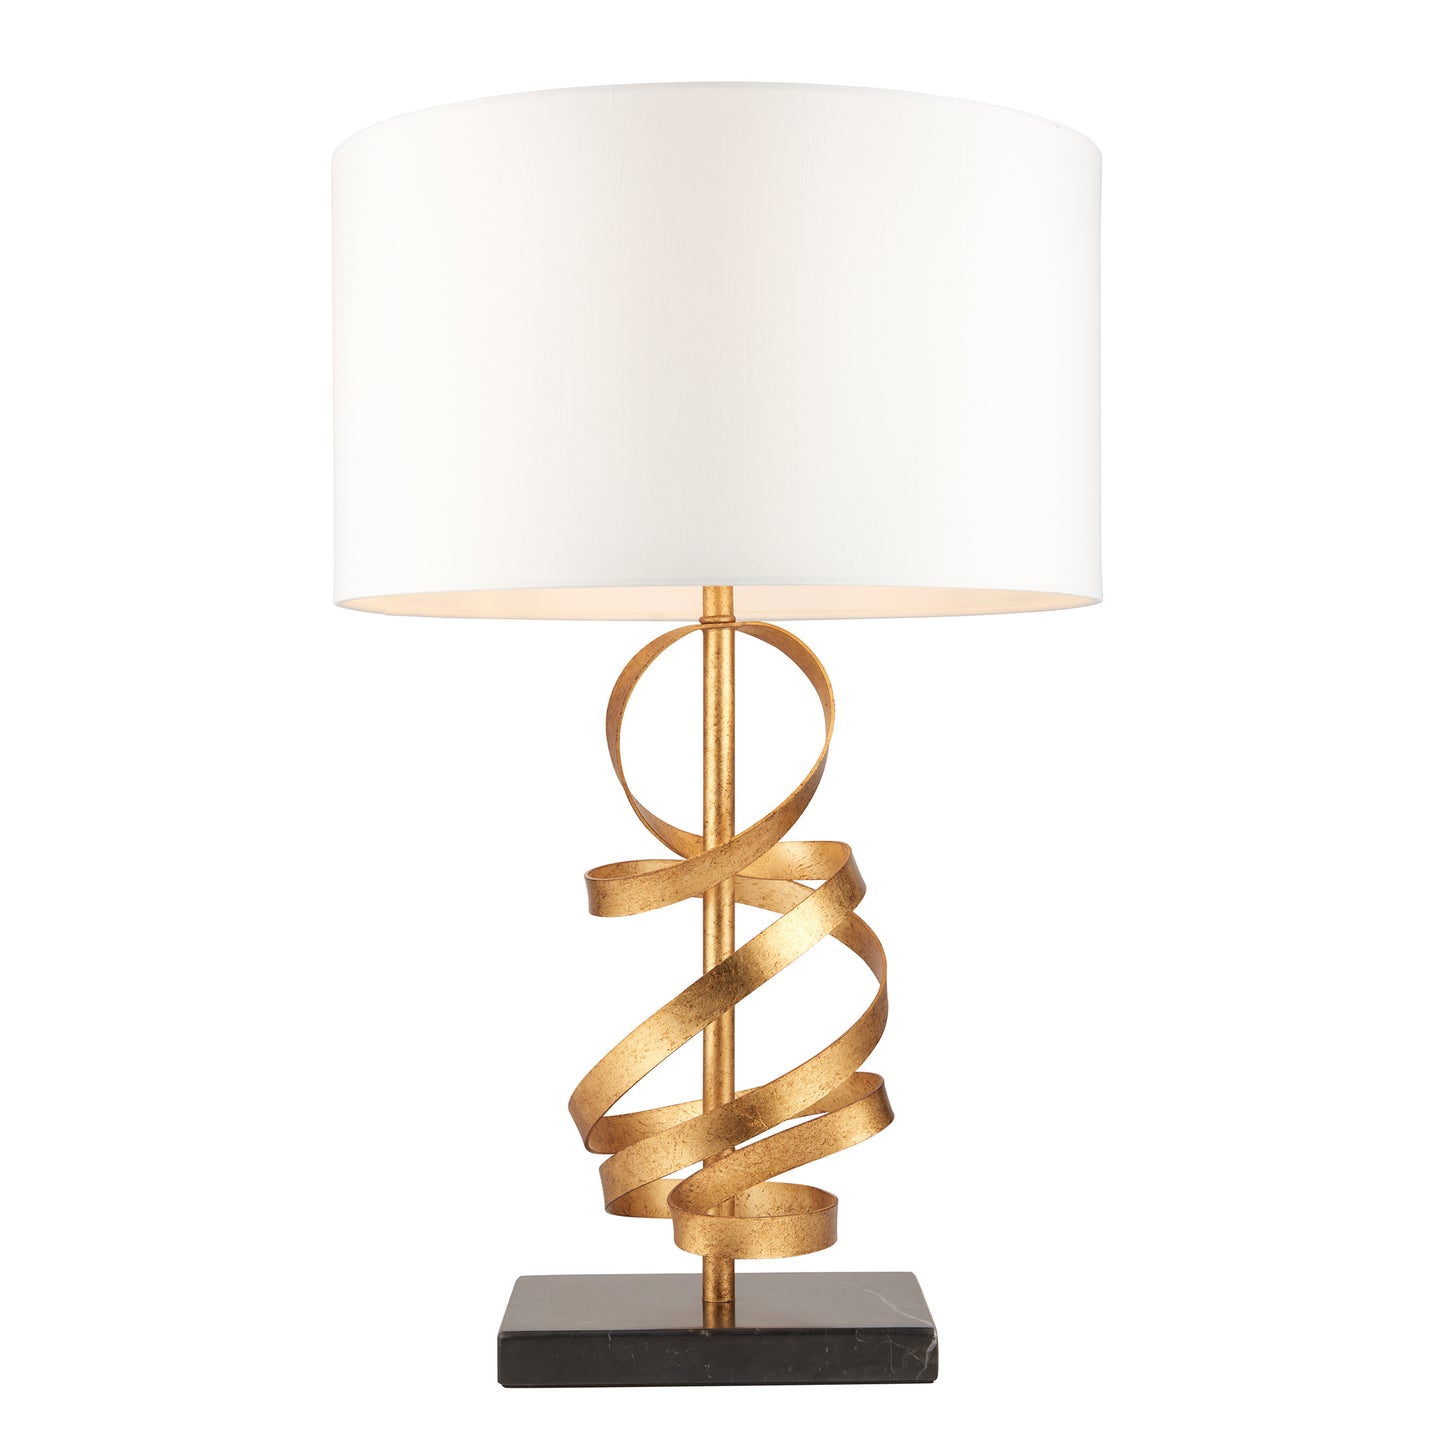 A Godfrey Table Light Gold lamp with a white shade for stylish interior decor from Kikiathome.co.uk.